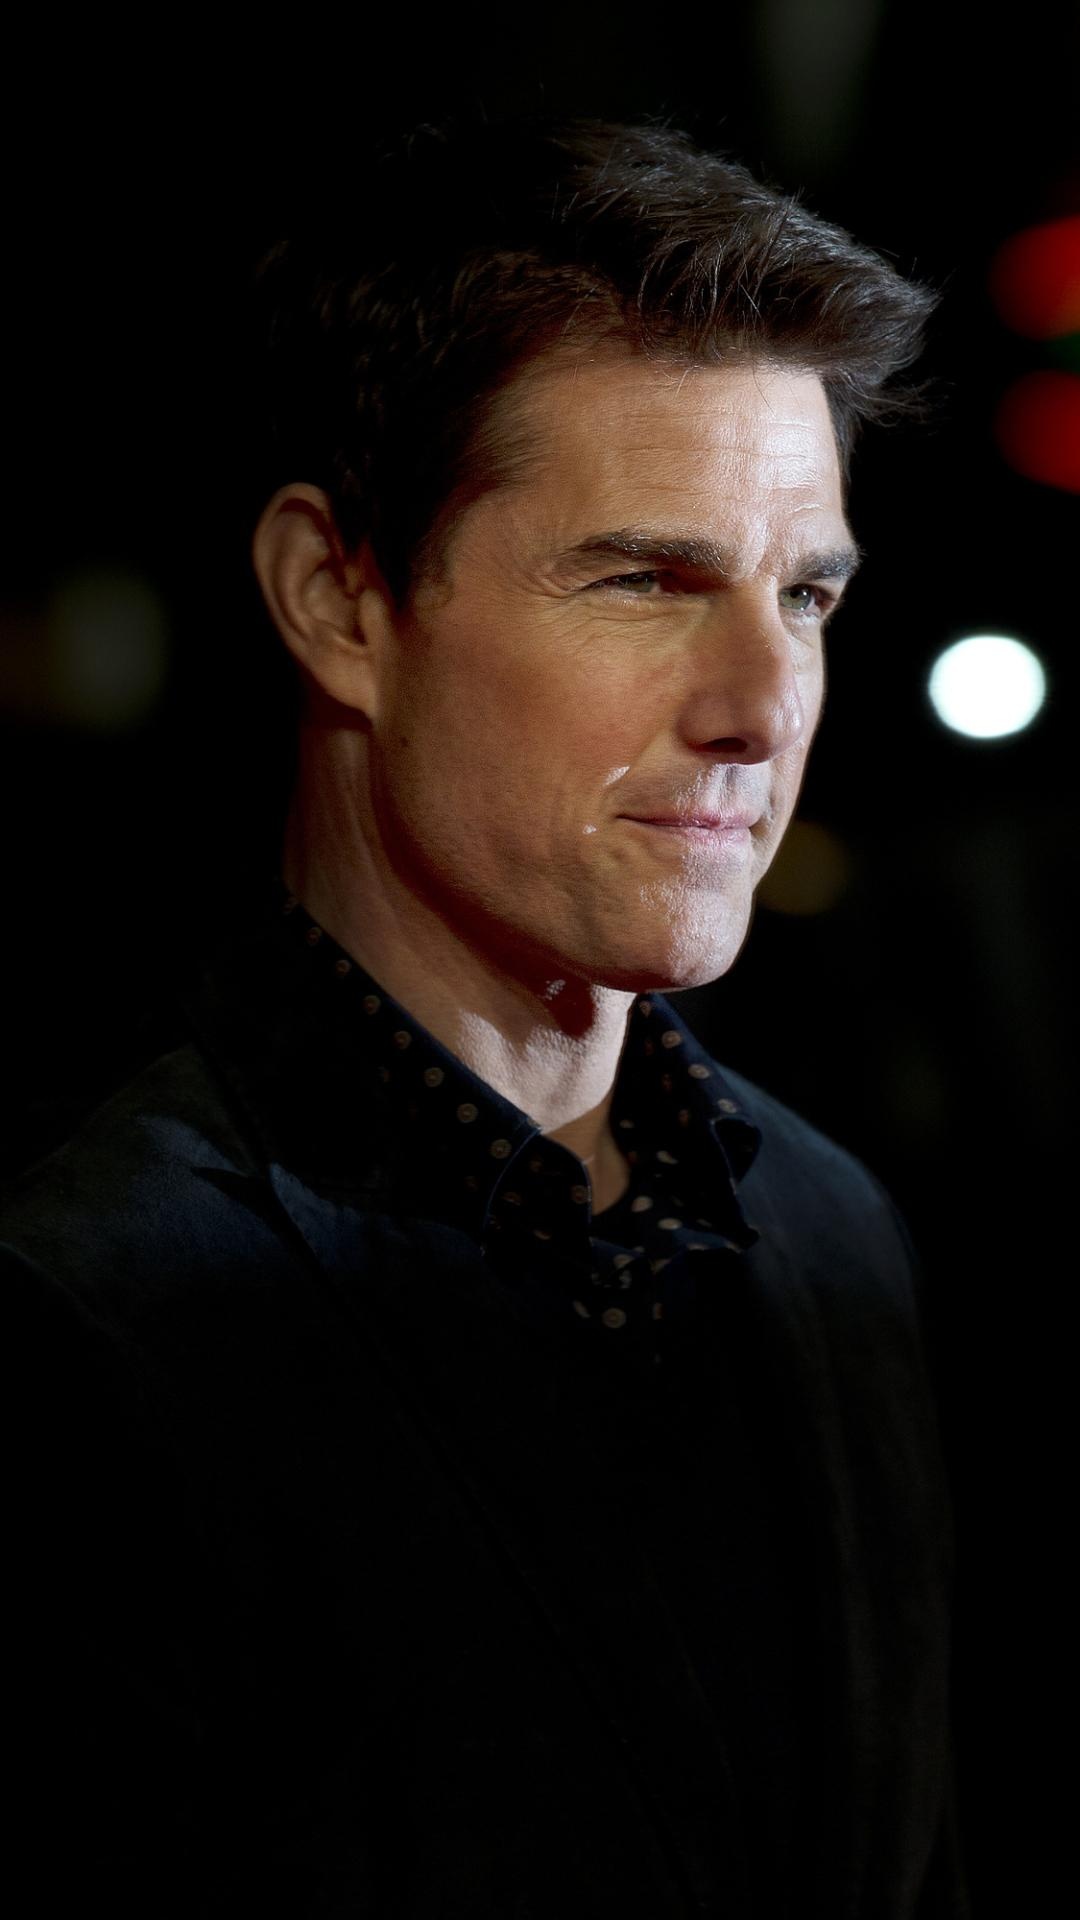 Tom Cruise phone wallpapers, High-quality images, Mobile background, Popular celebrity, 1080x1920 Full HD Phone